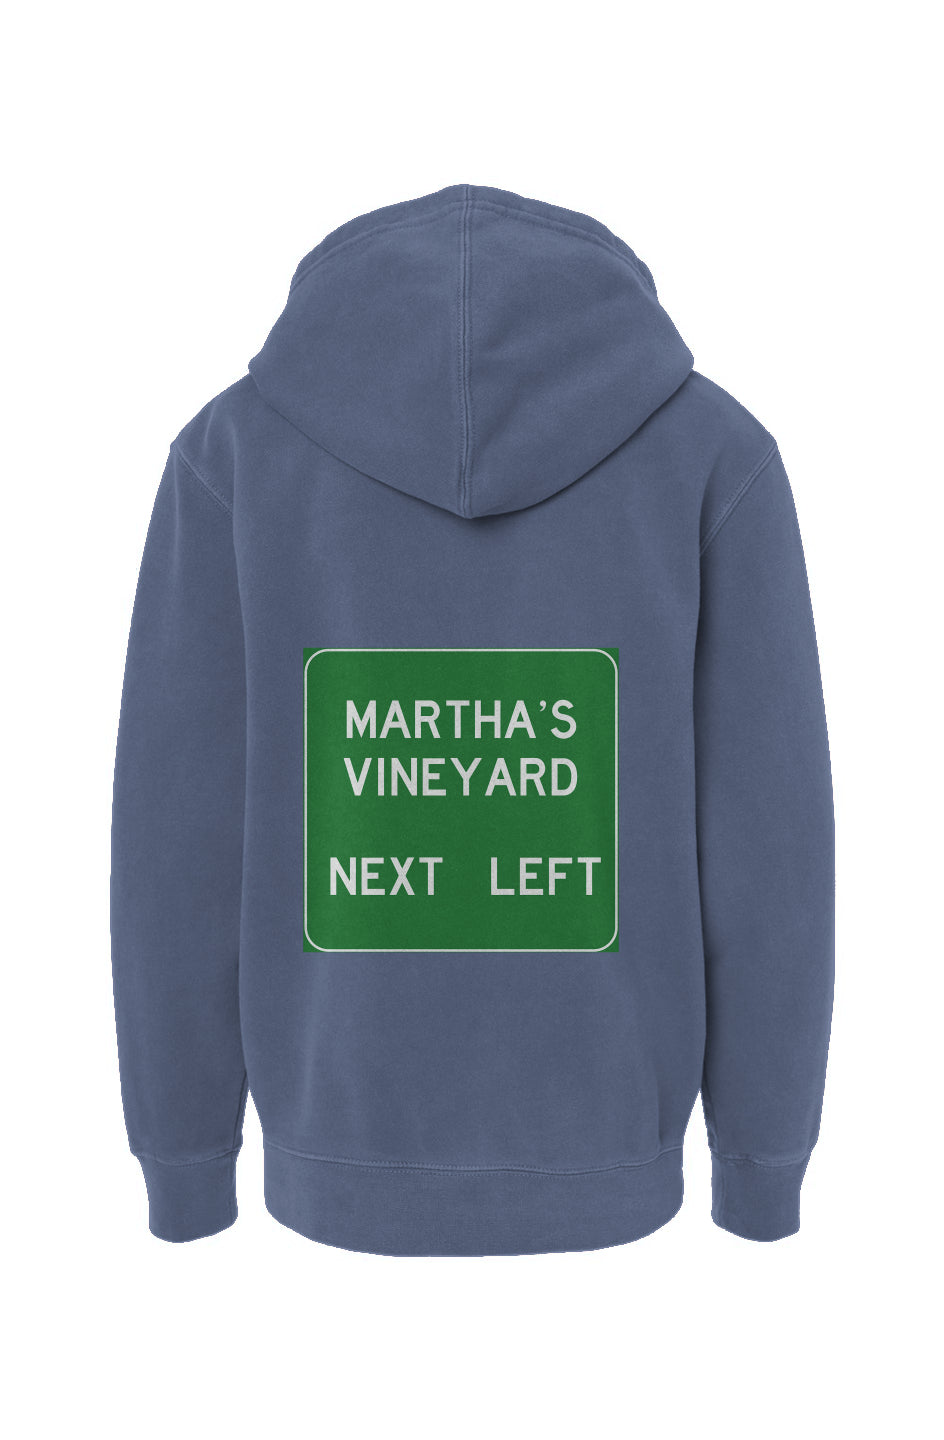 Next Left Youth Hoodie